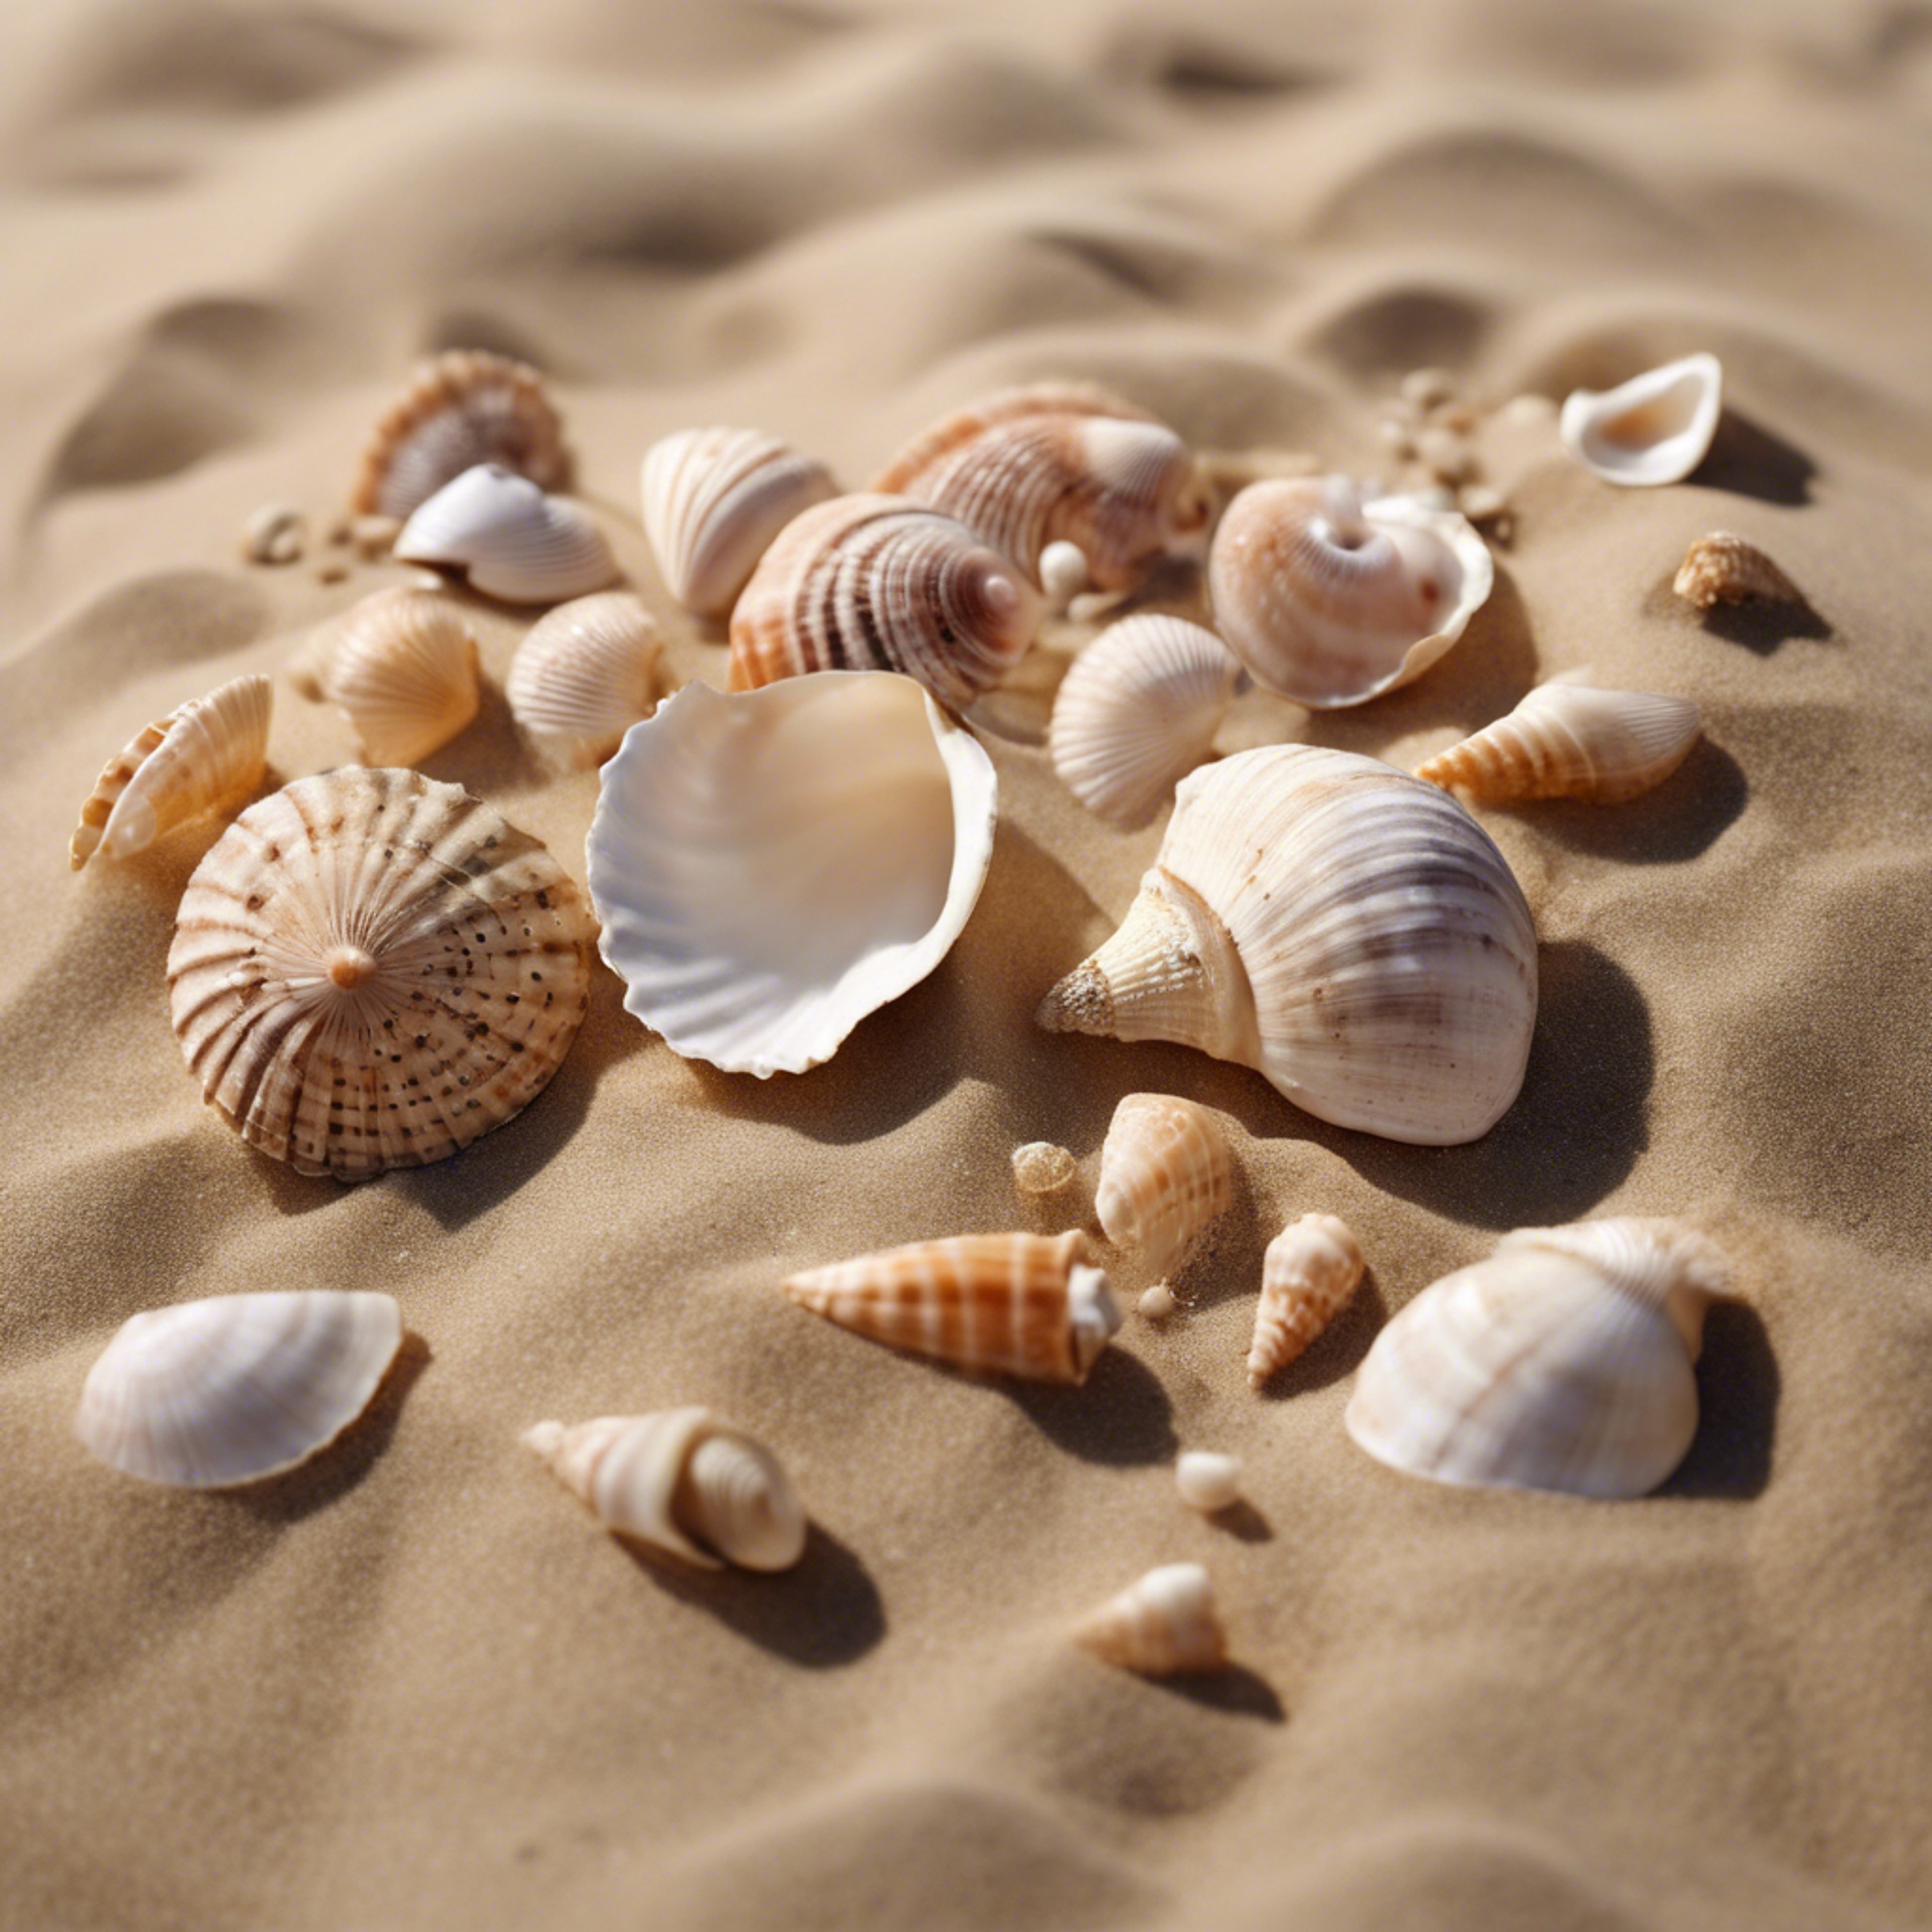 An arrangement of seashells of various sizes in a cool beige sand. Ταπετσαρία[d4509fc1f43d45f6bba6]